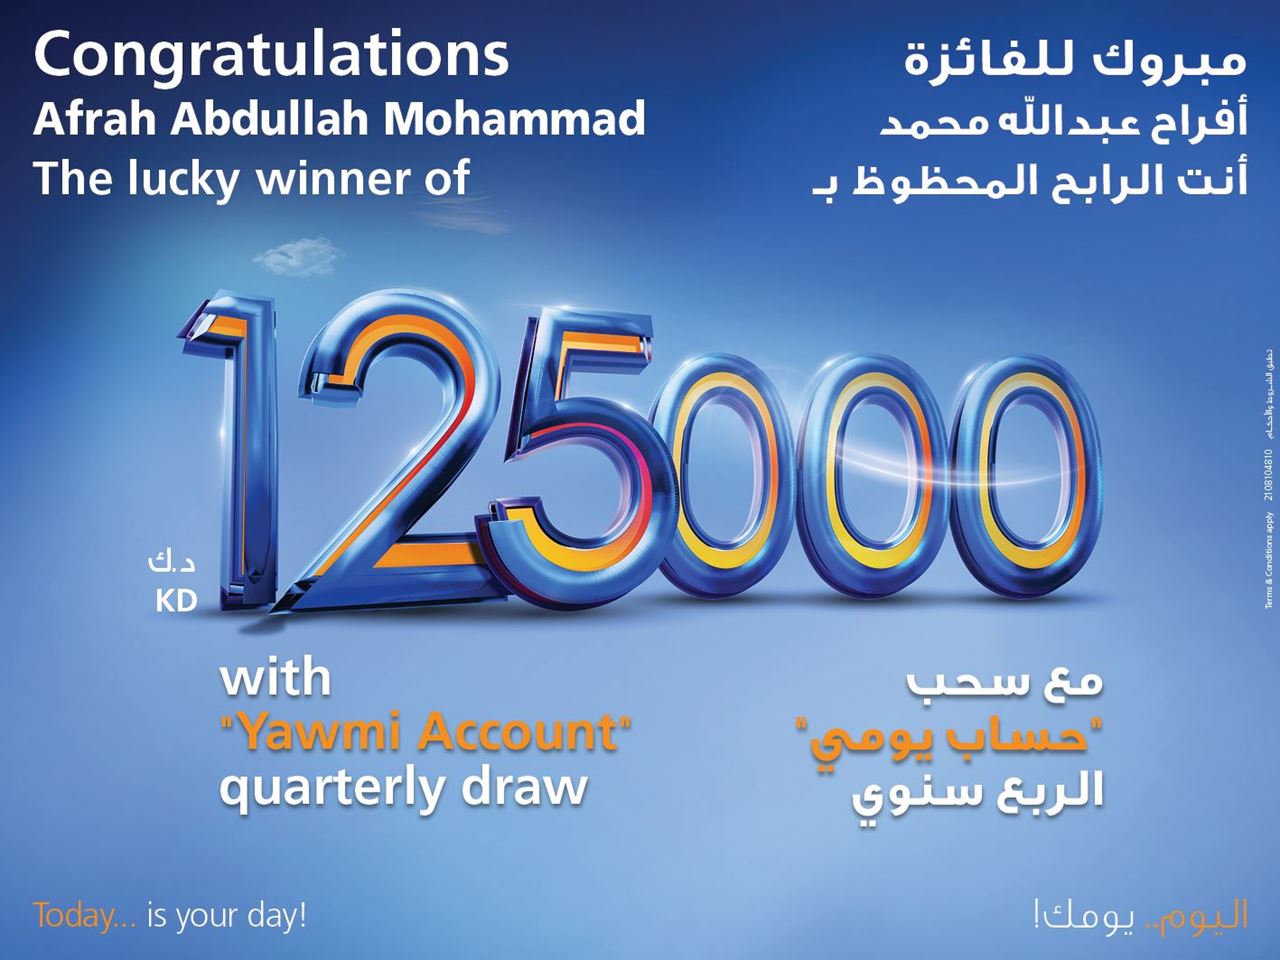 Burgan Bank announces the new winner of the KD 125,000 cash prize in the Yawmi Quarterly Draw